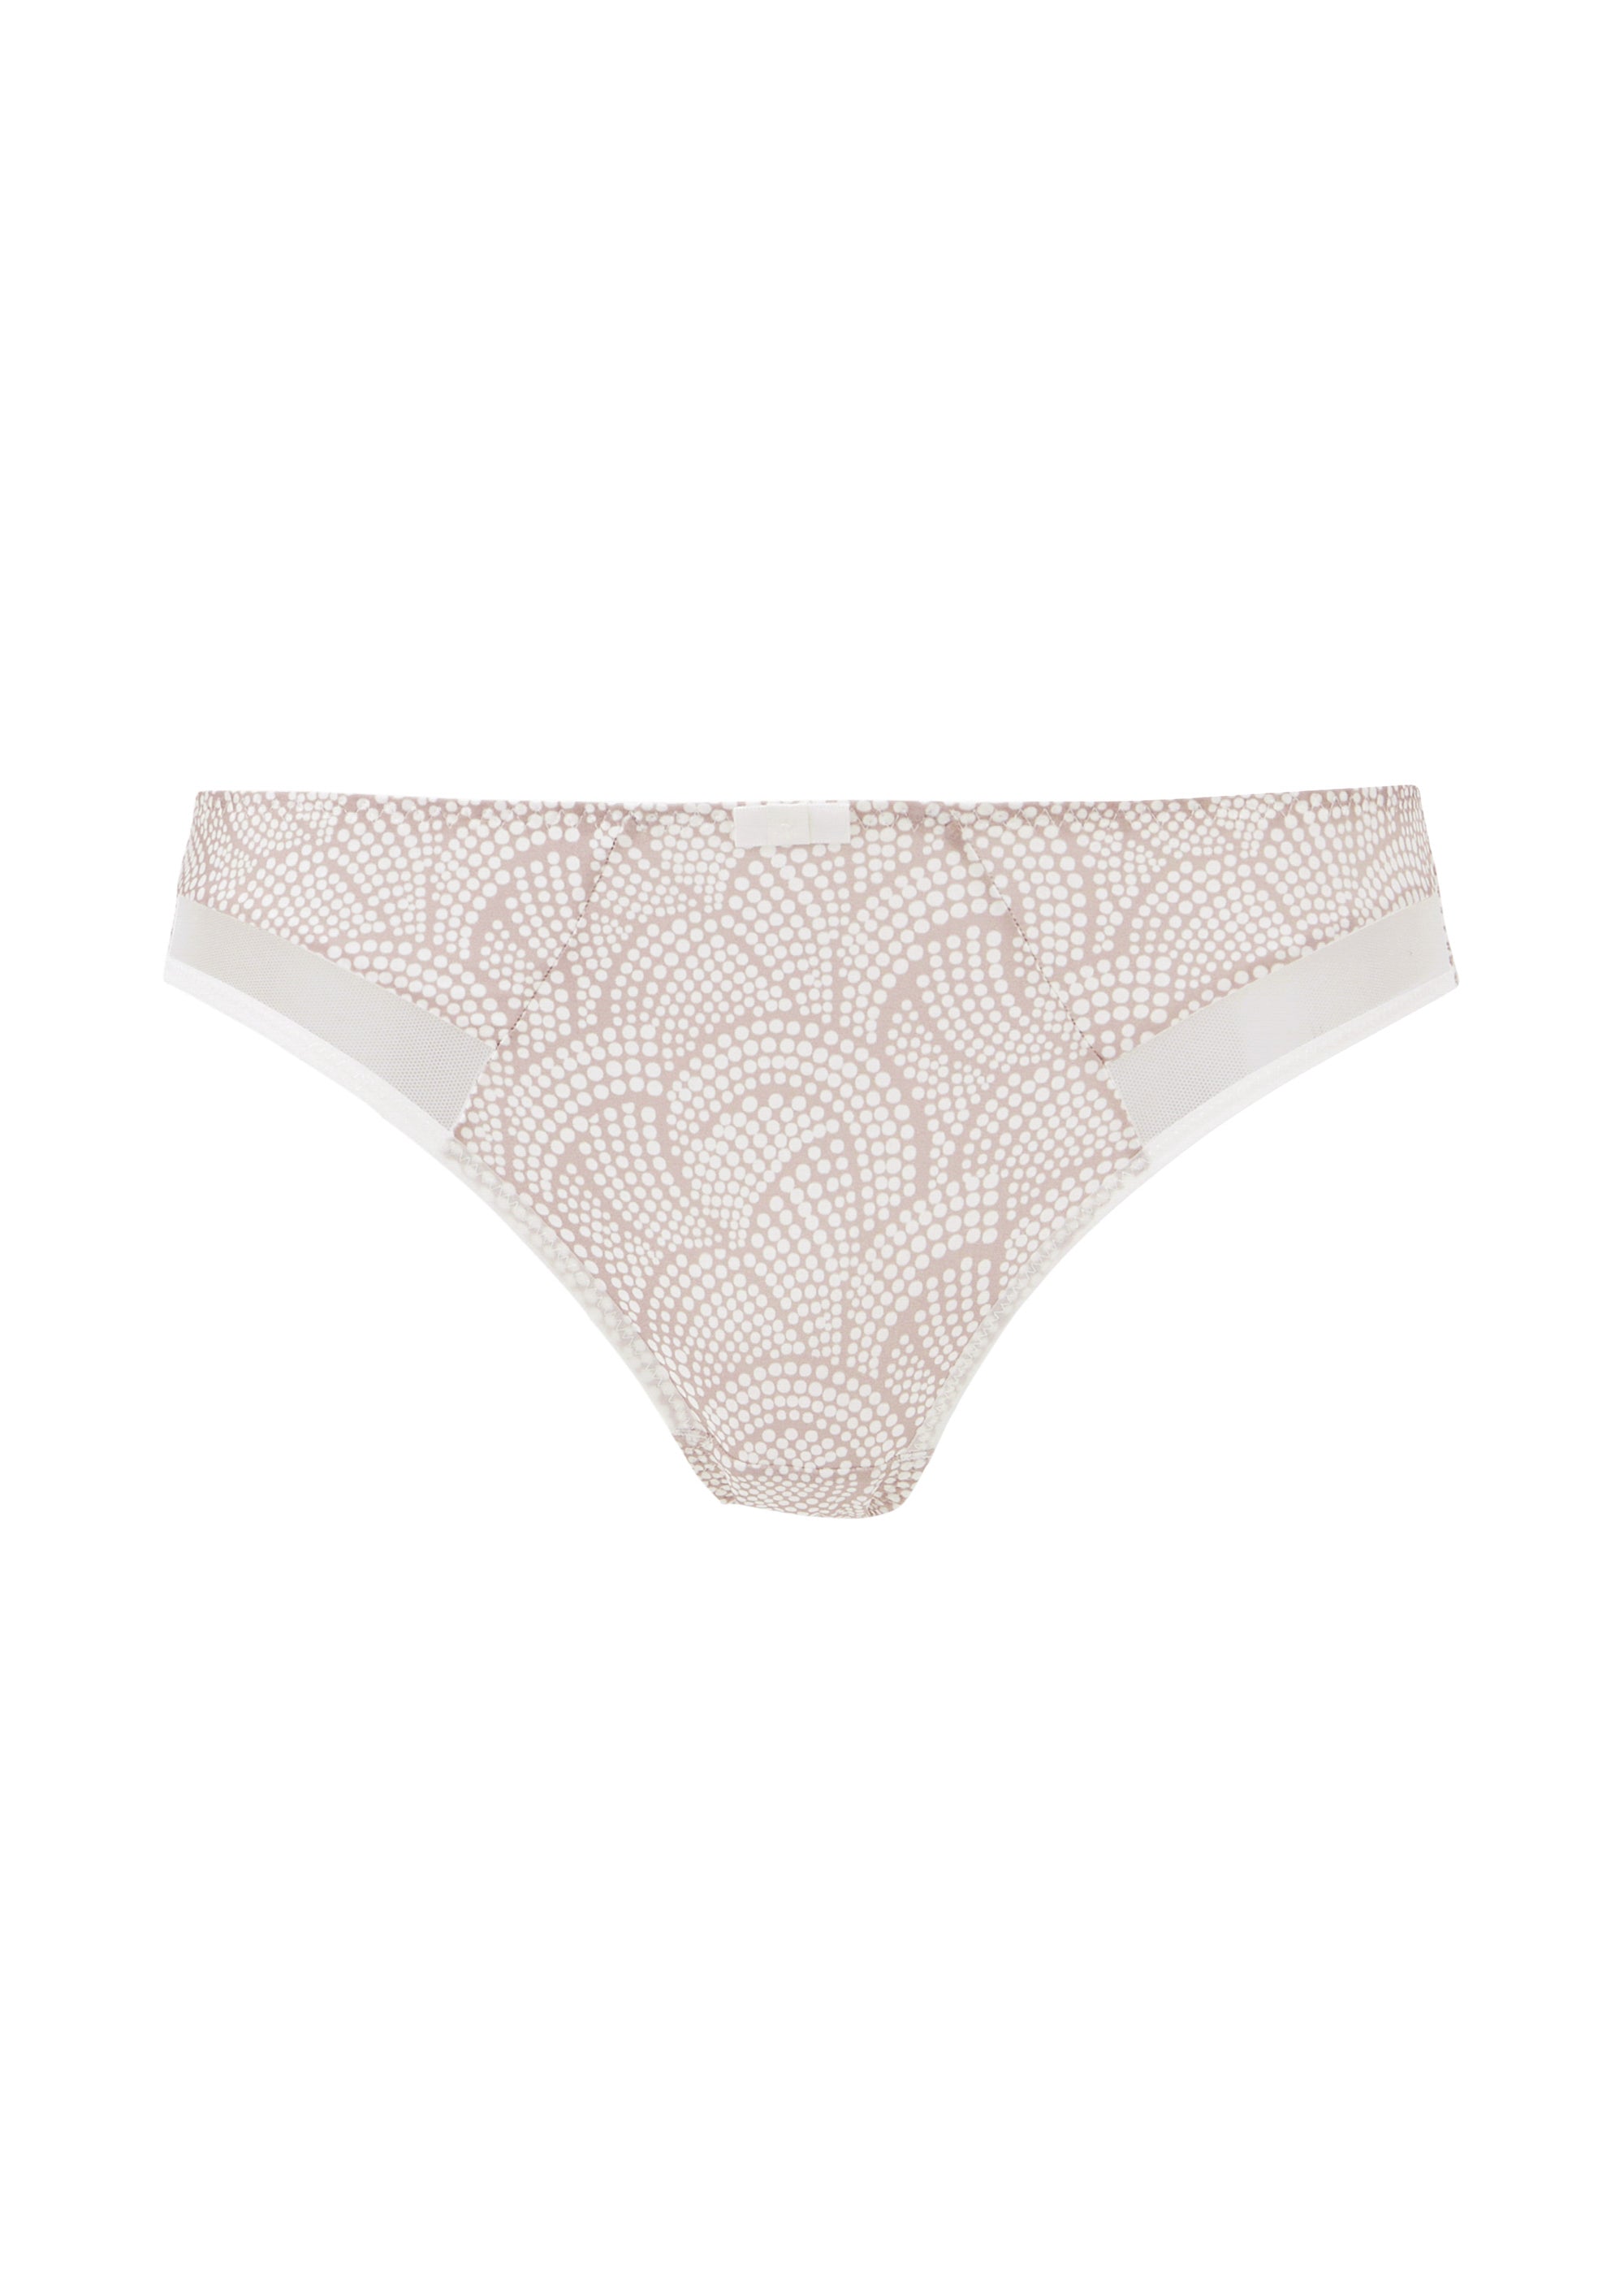 Brief Complice Taupe Graphic Print